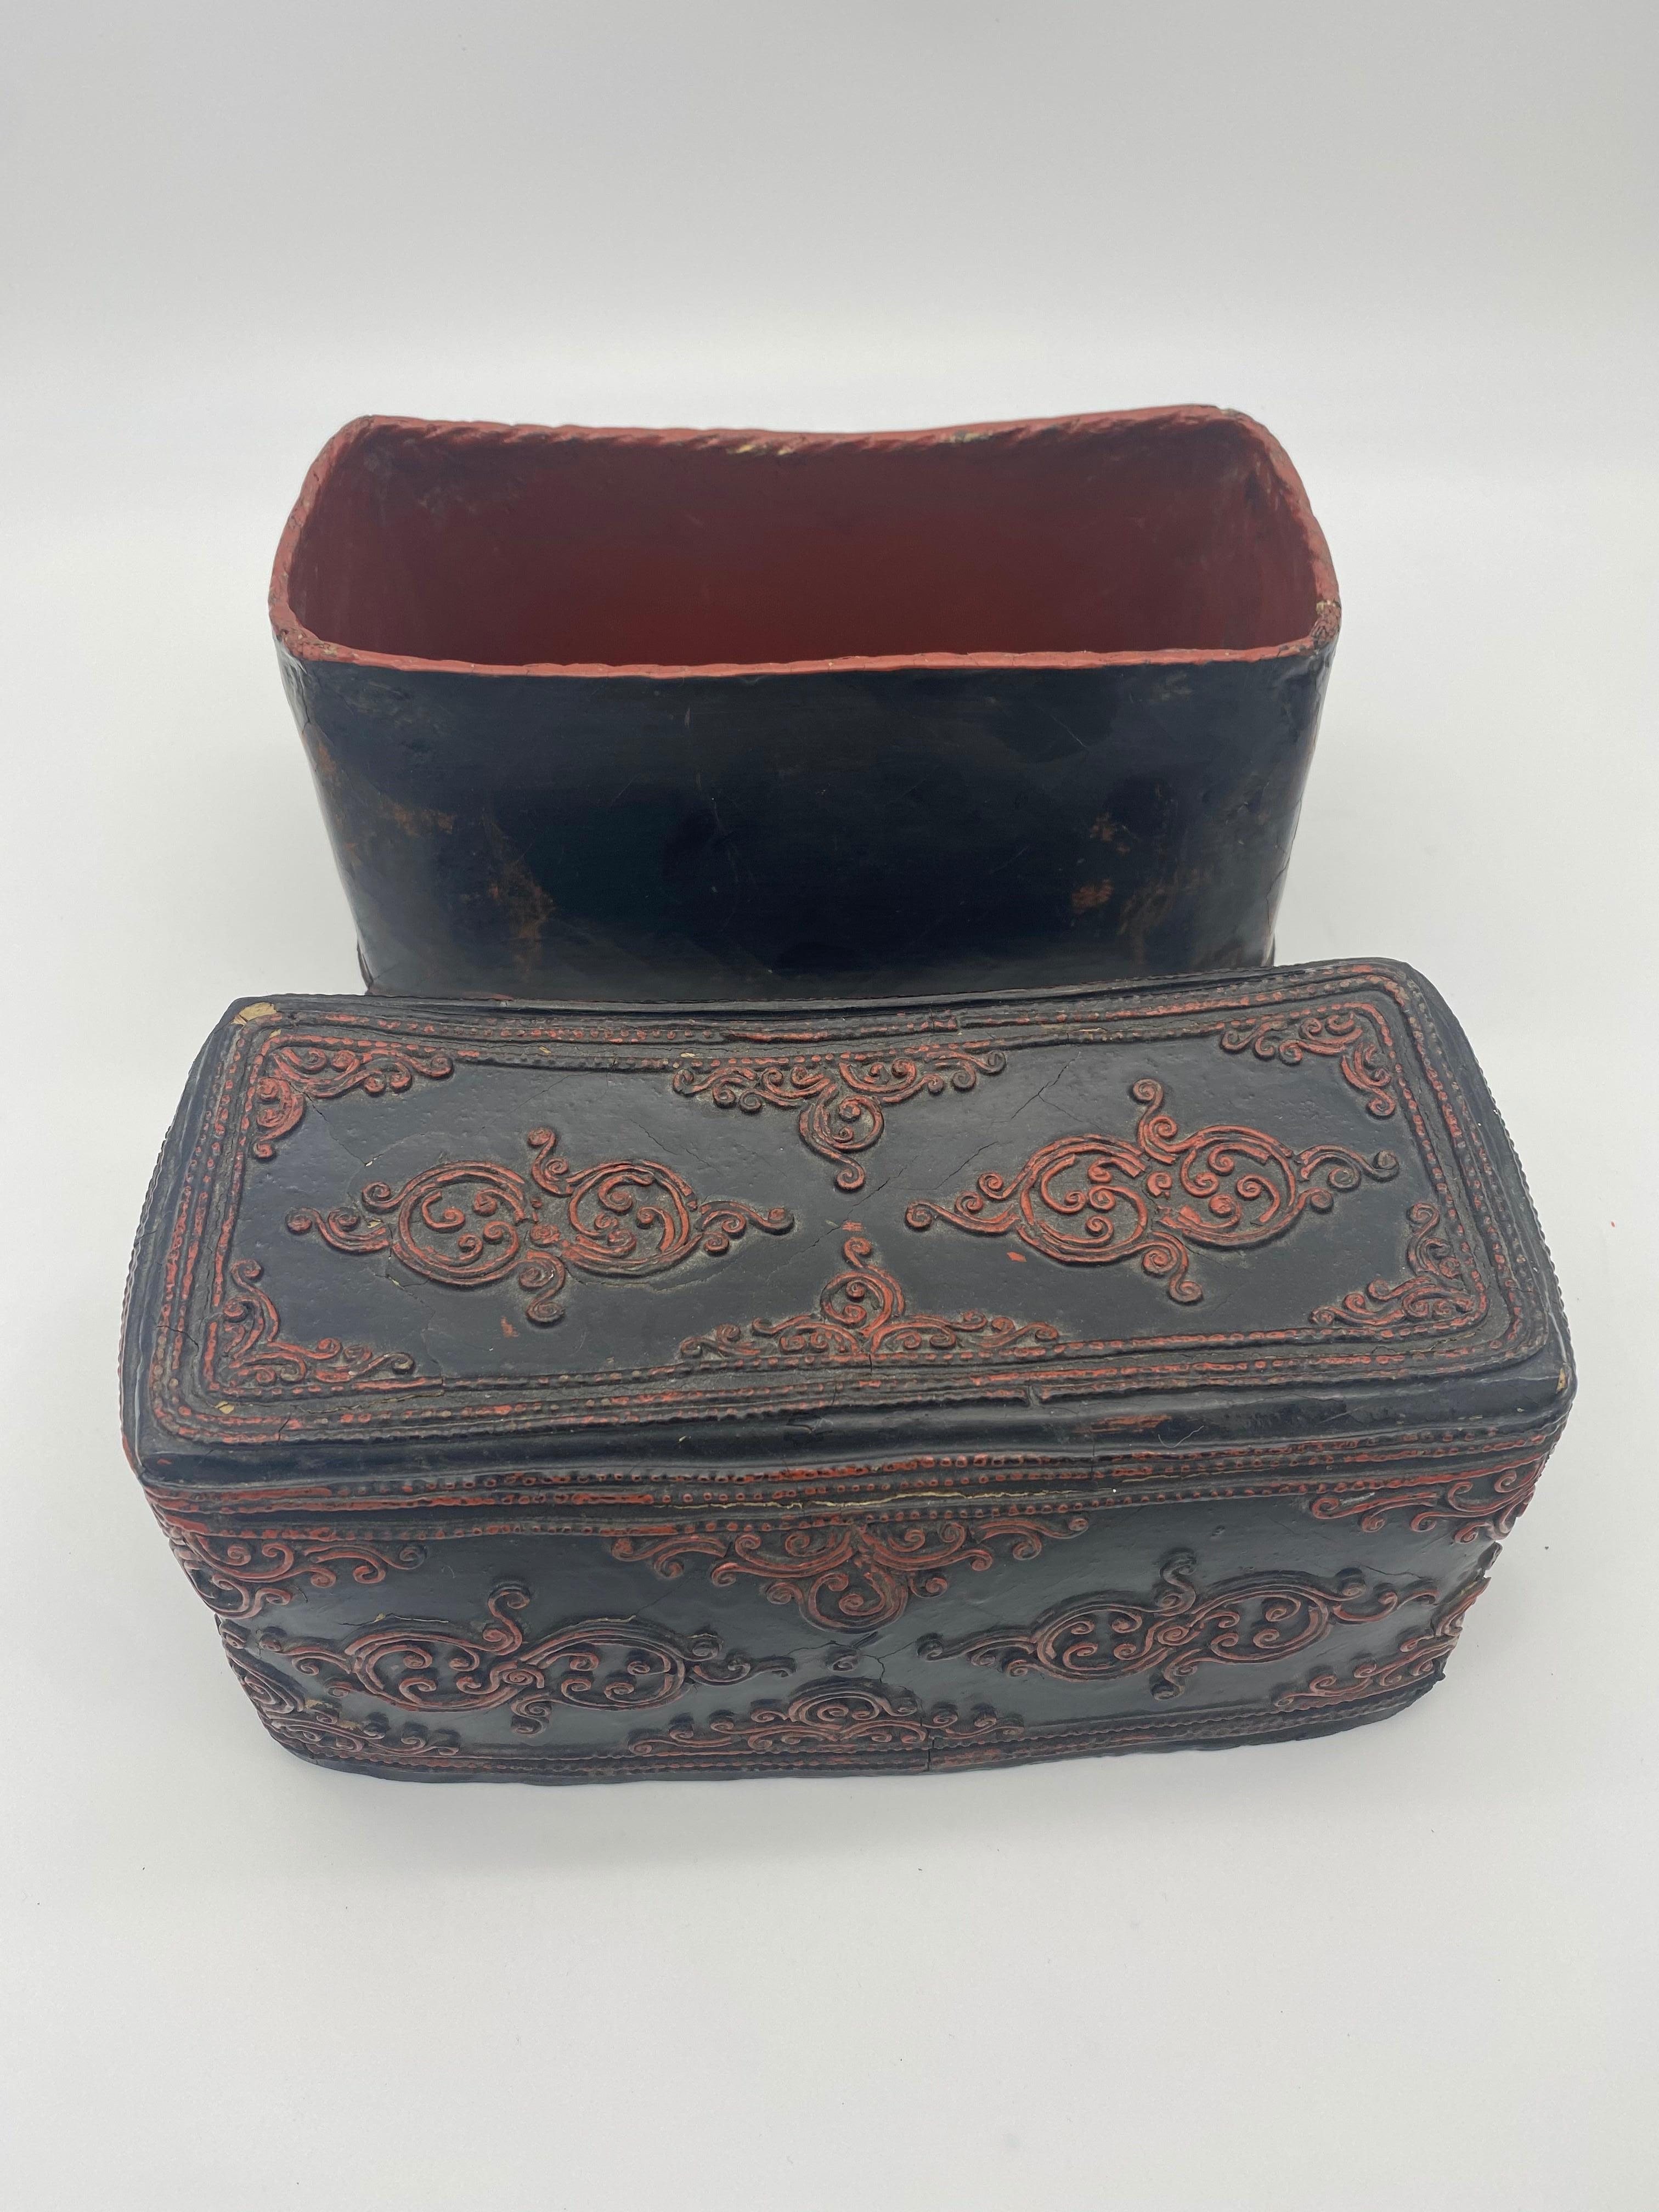 Qing 18th Century Burmese Rakhine State Lacquer Bamboo Pillow Box For Sale